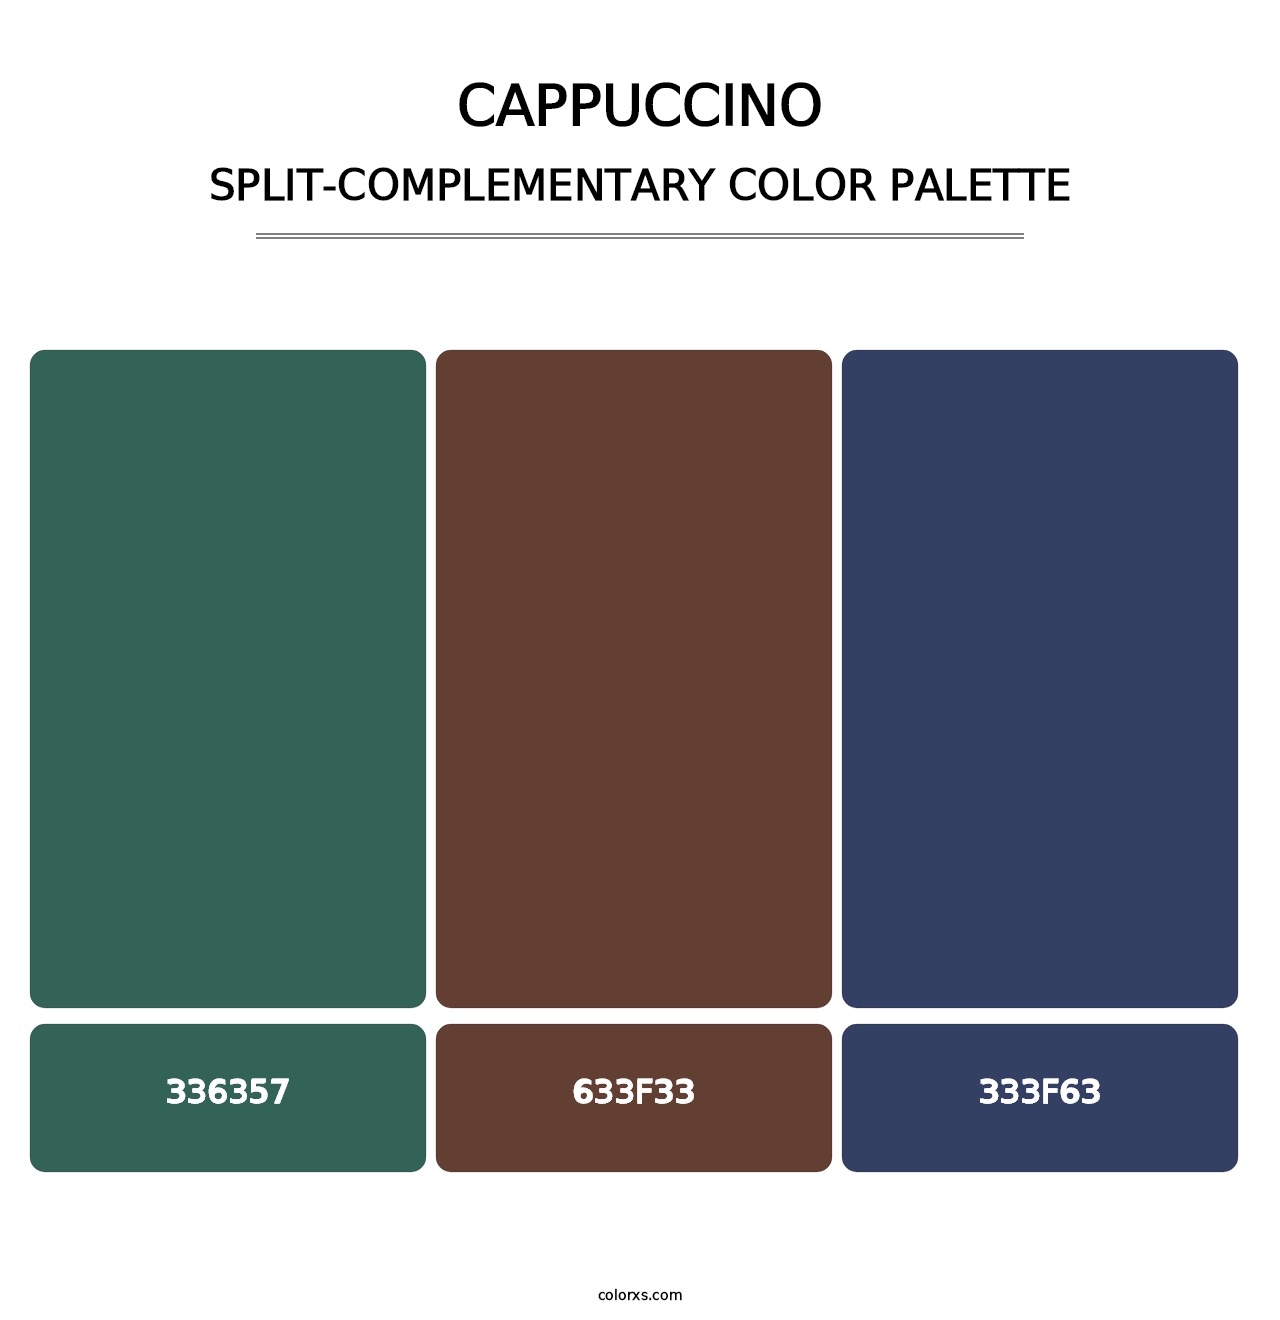 Cappuccino - Split-Complementary Color Palette